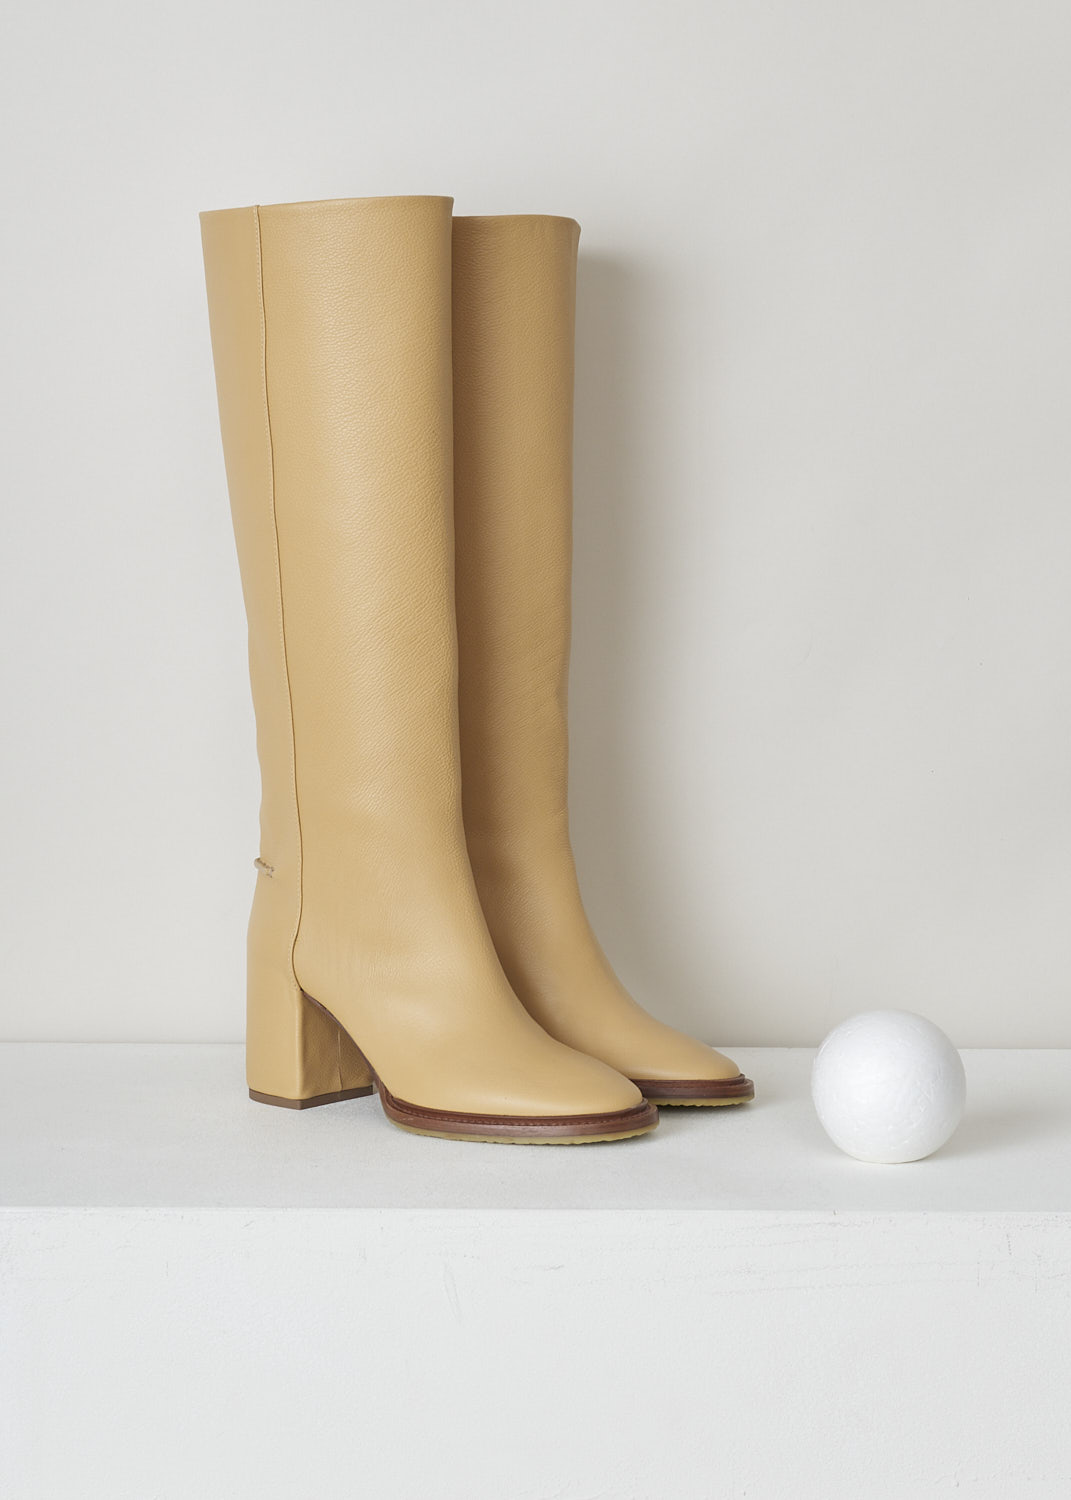 CHLOÃ‰, EDITH HEELED BOOTS IN SOFT TAN, CHC21W519V3275_EDITH_HEEL_BOOTS_SOFT_TAN, Beige, Front, These knee-high black leather slip-on boots have a blocked heel with stitched piping on the back shaft. The boots have a round toe and a contrasting brown sole.
